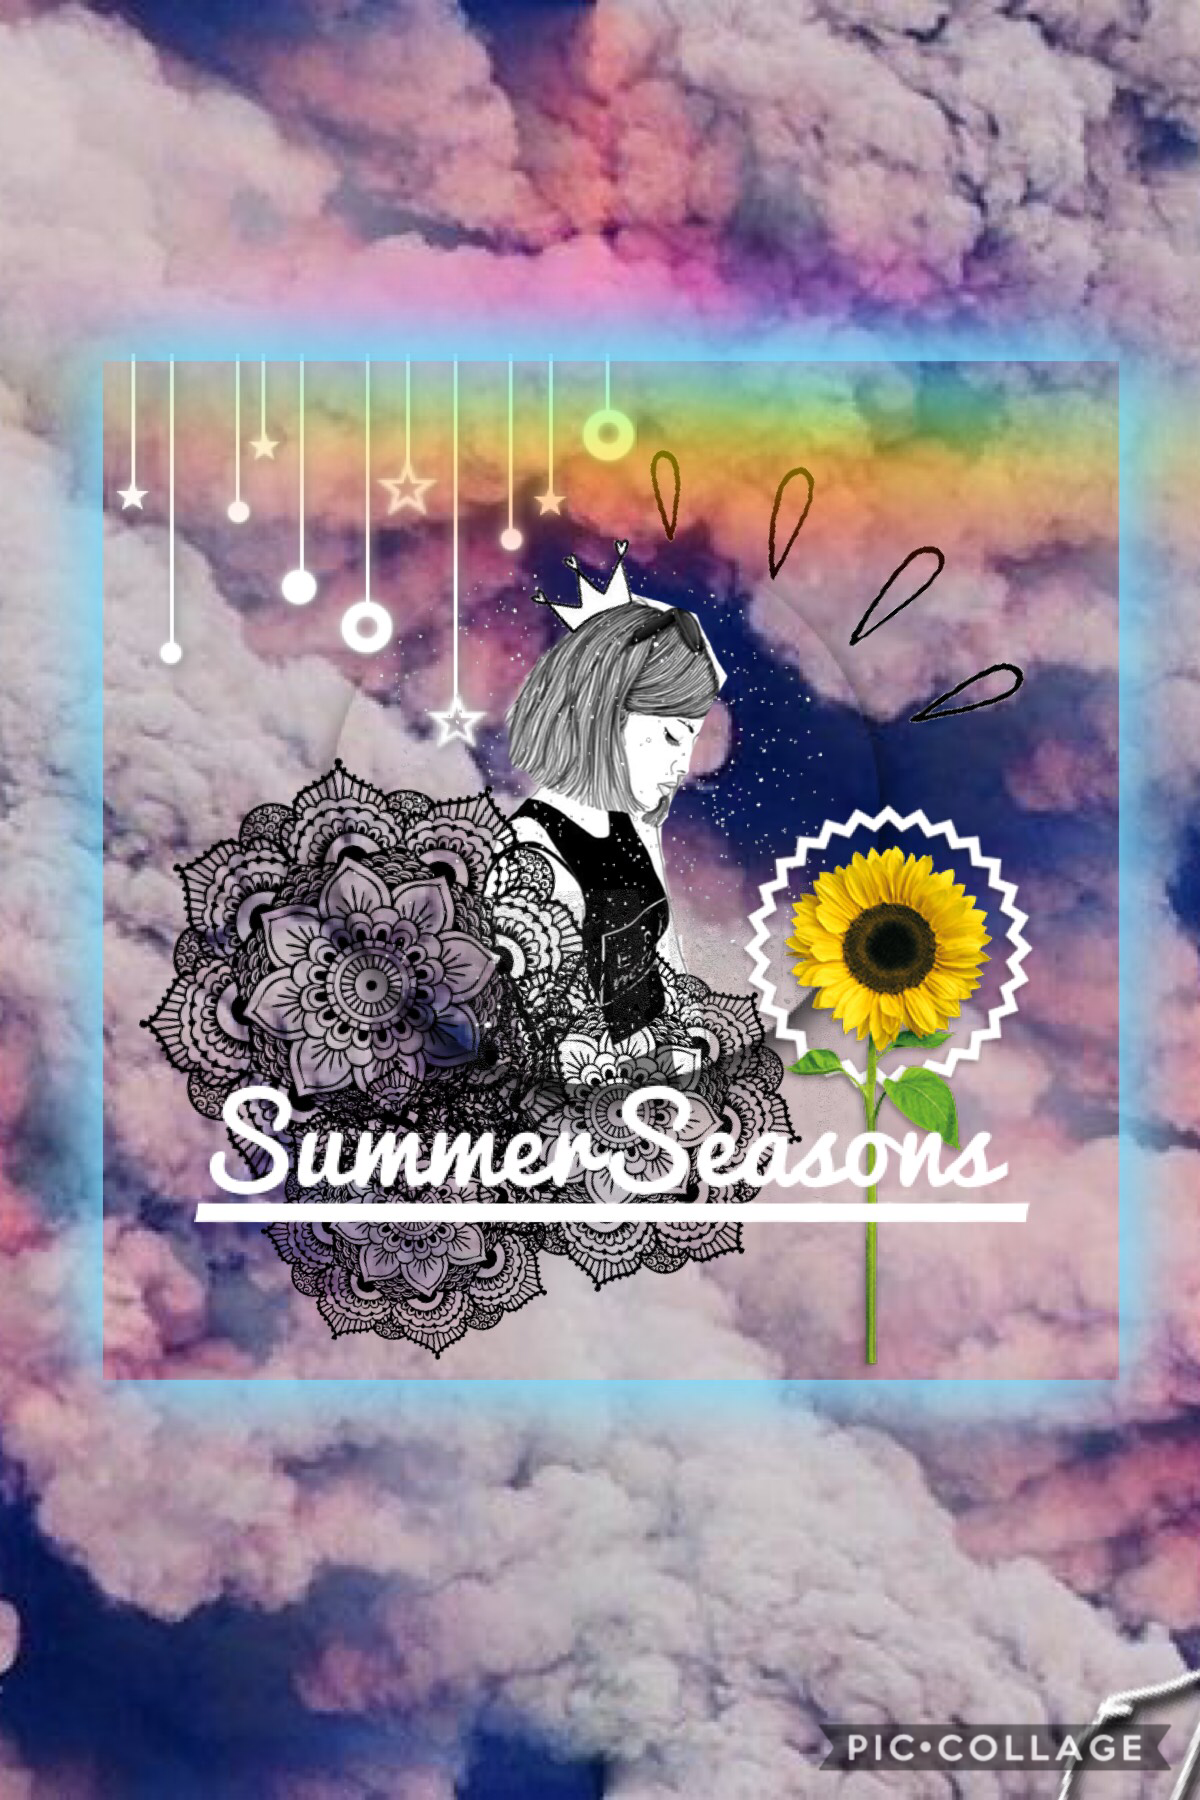 for SummerSeasons who just reasently changed her name (it was originally FollowGirl) so I had to redo❤️